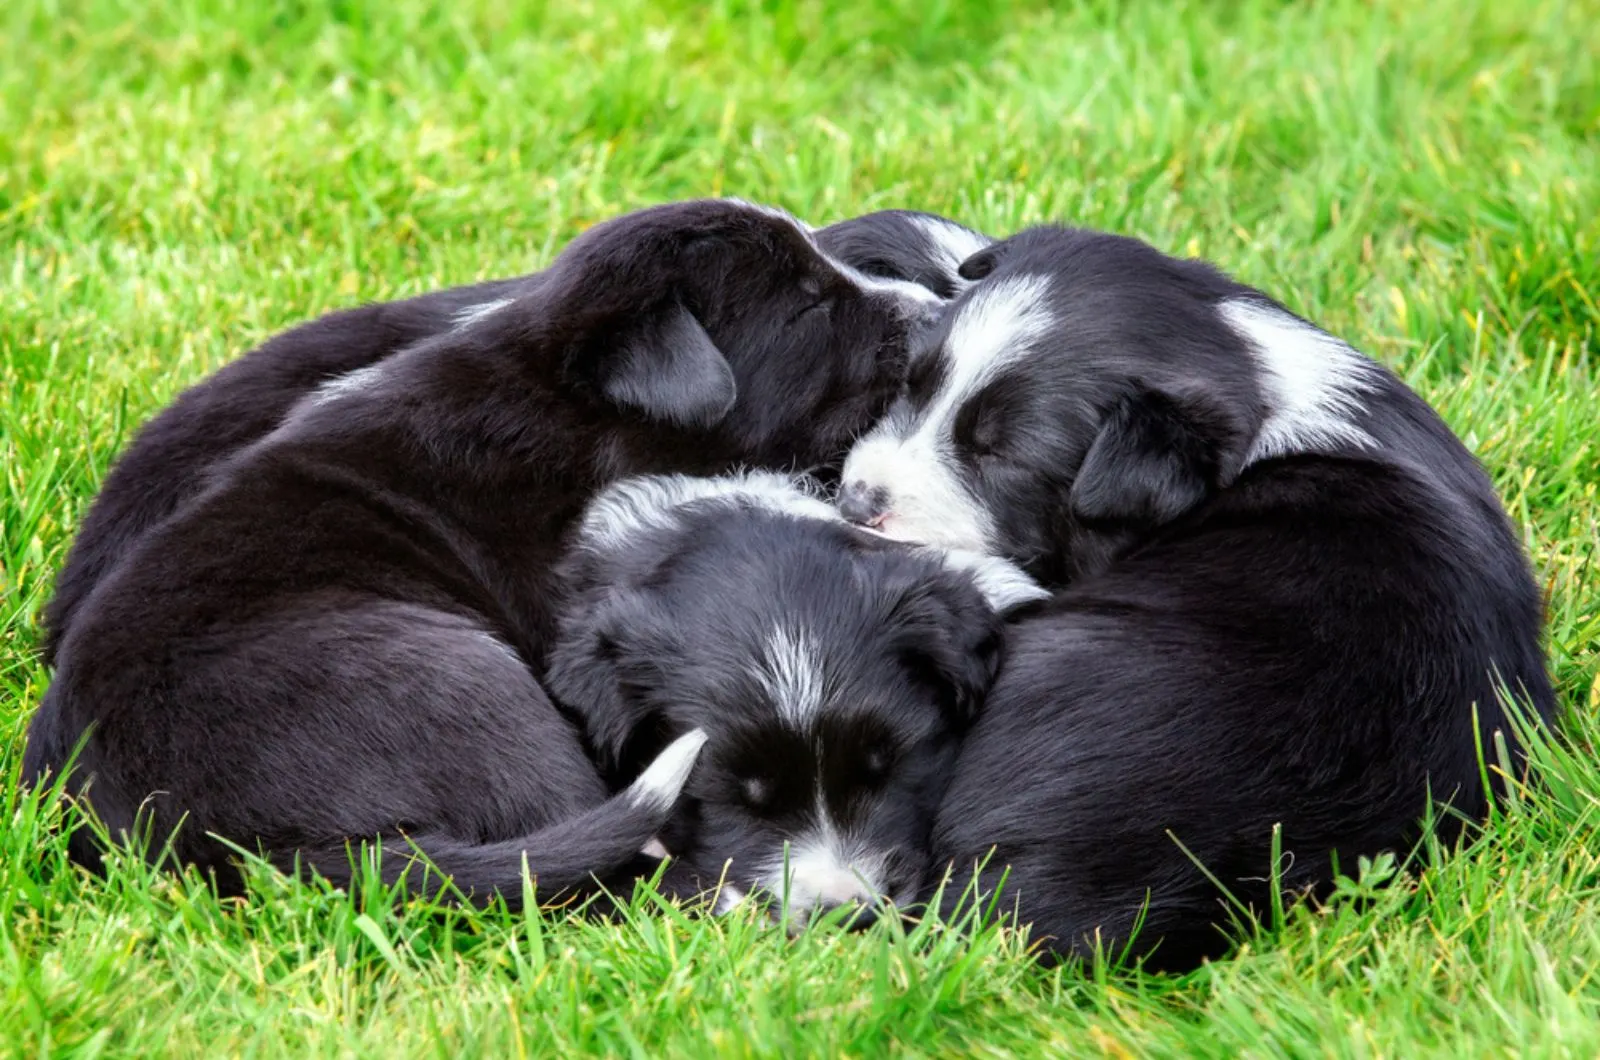 adorable border collie puppies sleeping together on the grass